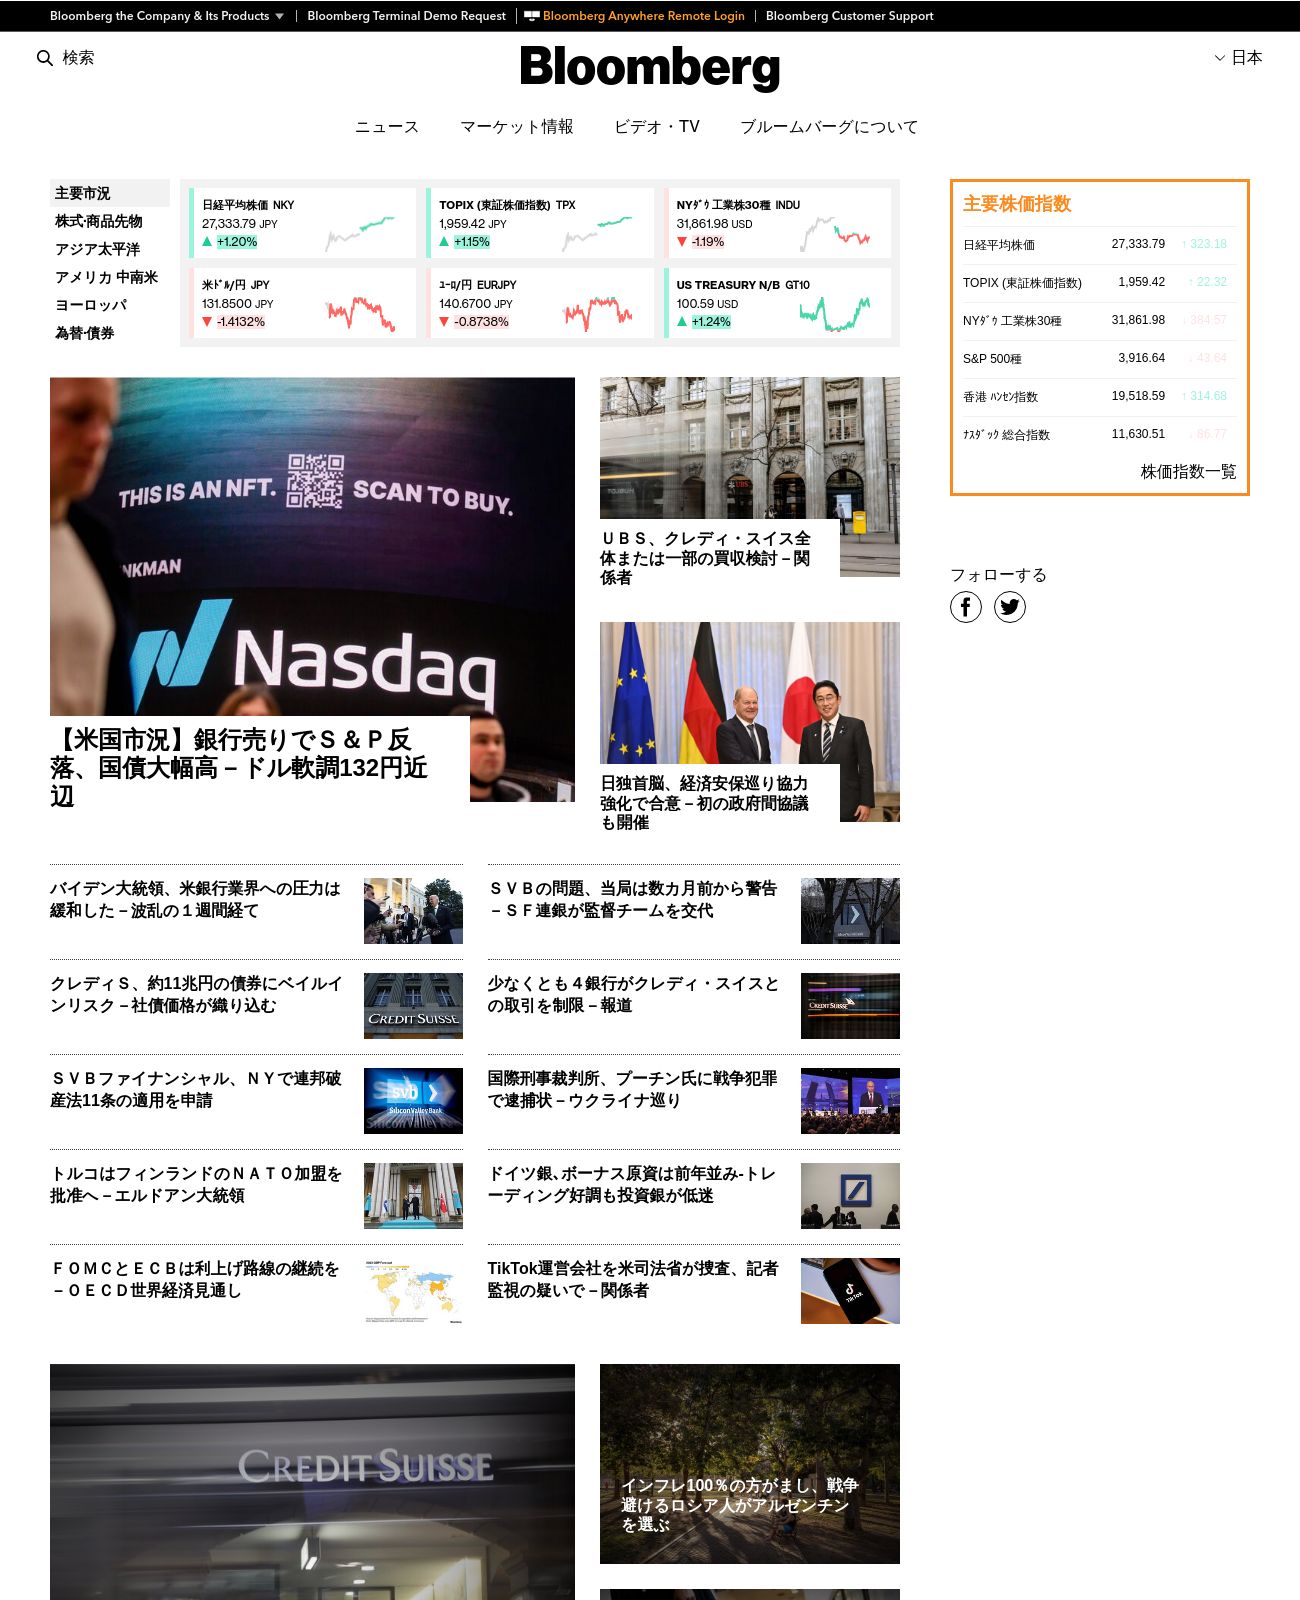 Bloomberg Japan at 2023-03-19 09:59:16+09:00 local time